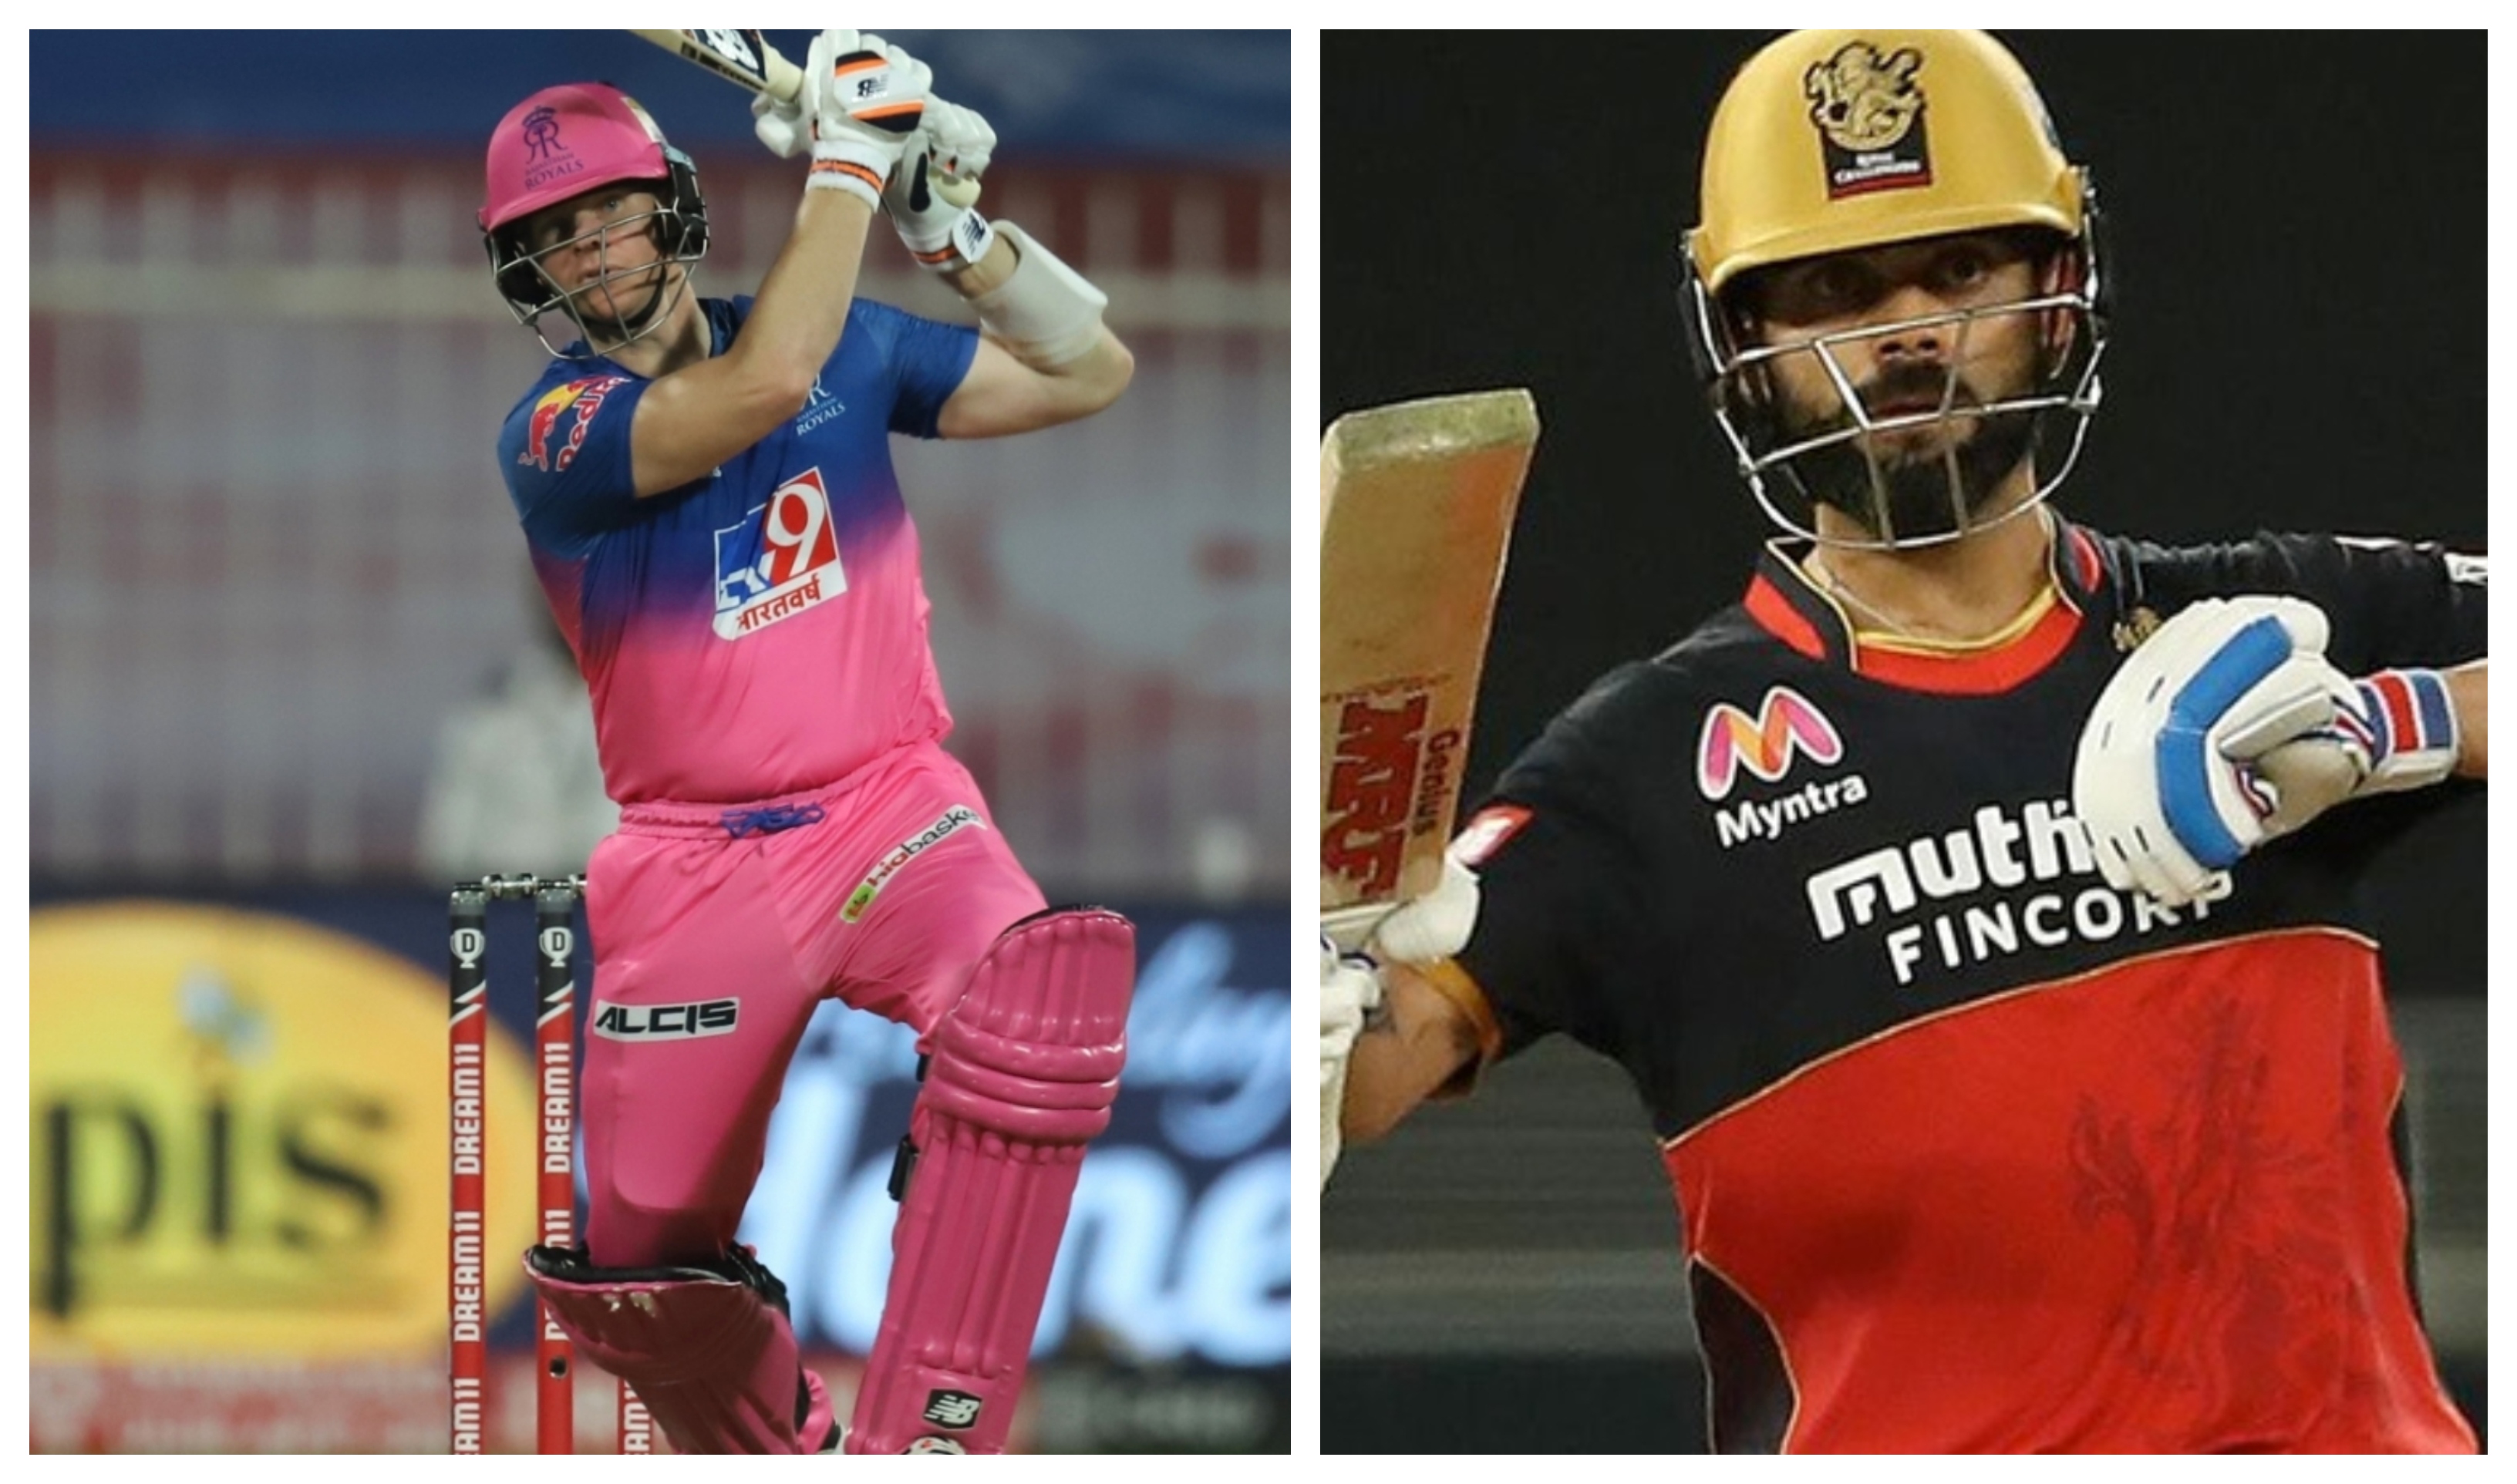 RR and RCB have suffered defeats in their last outings 